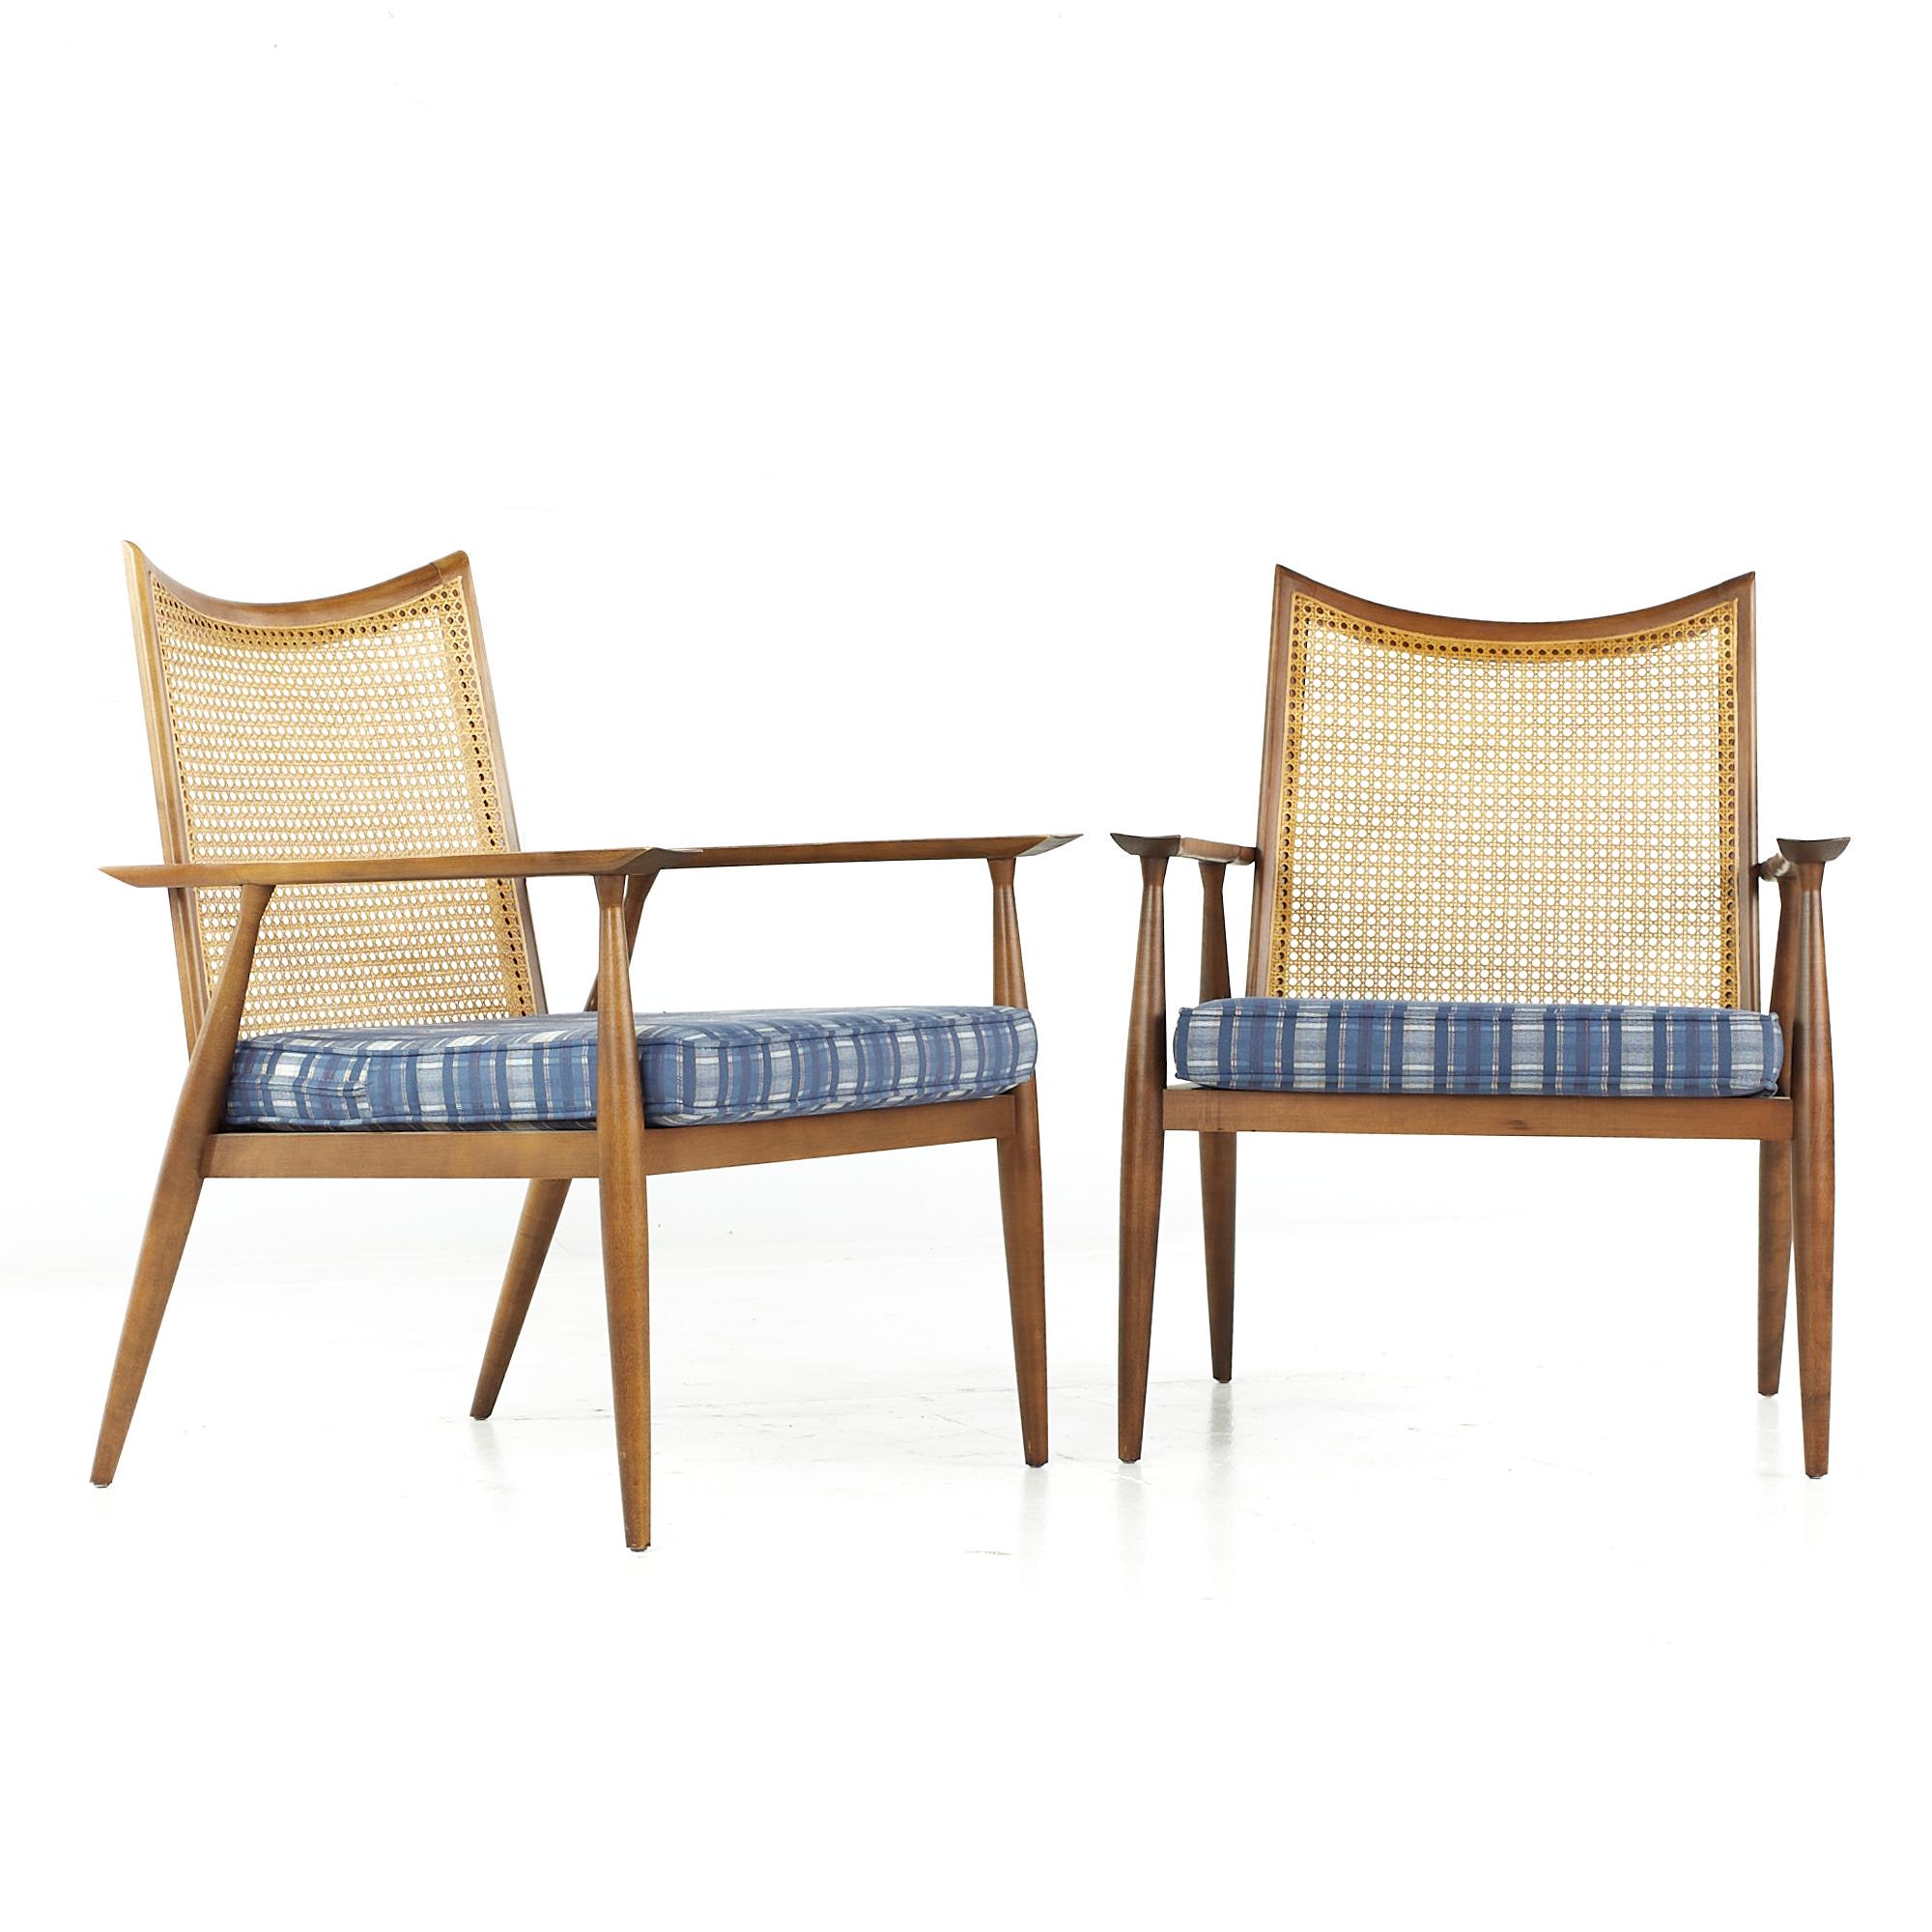 Paul McCobb for Winchendon midcentury cane and walnut lounge chairs - pair

Each chair measures: 26.25 wide x 25 deep x 33 inches high, with a seat height of 16.75 and arm height/chair clearance of 22.75 inches

All pieces of furniture can be